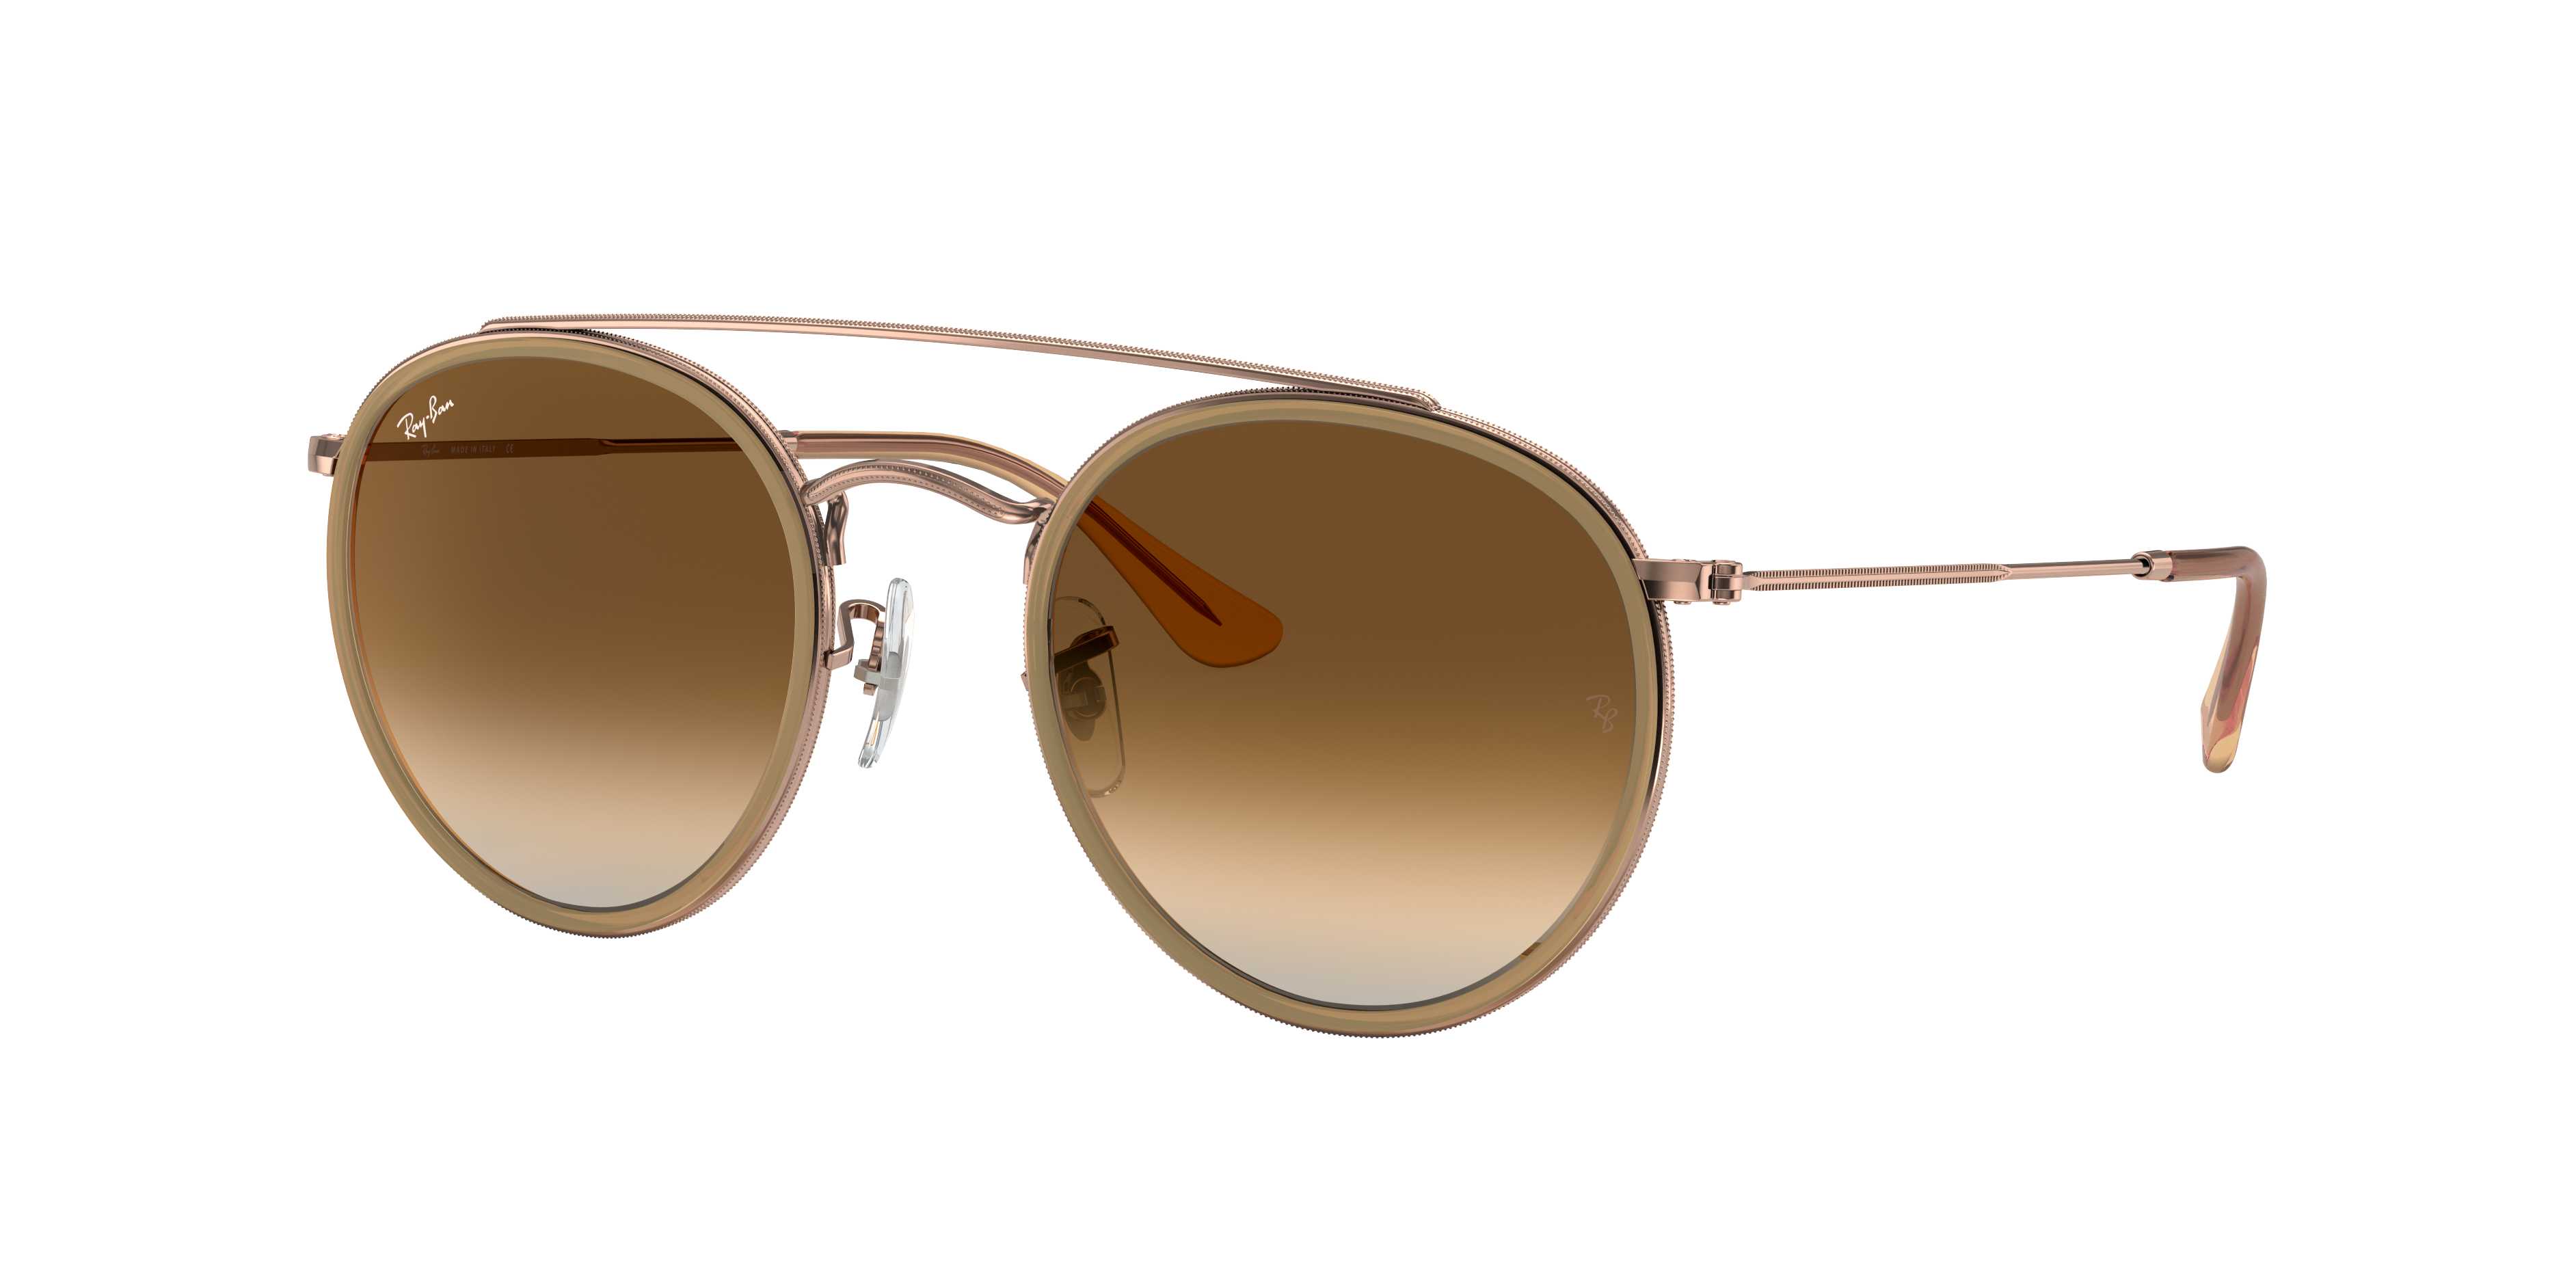 Round Double Bridge Sunglasses in Light Brown and Light Brown 